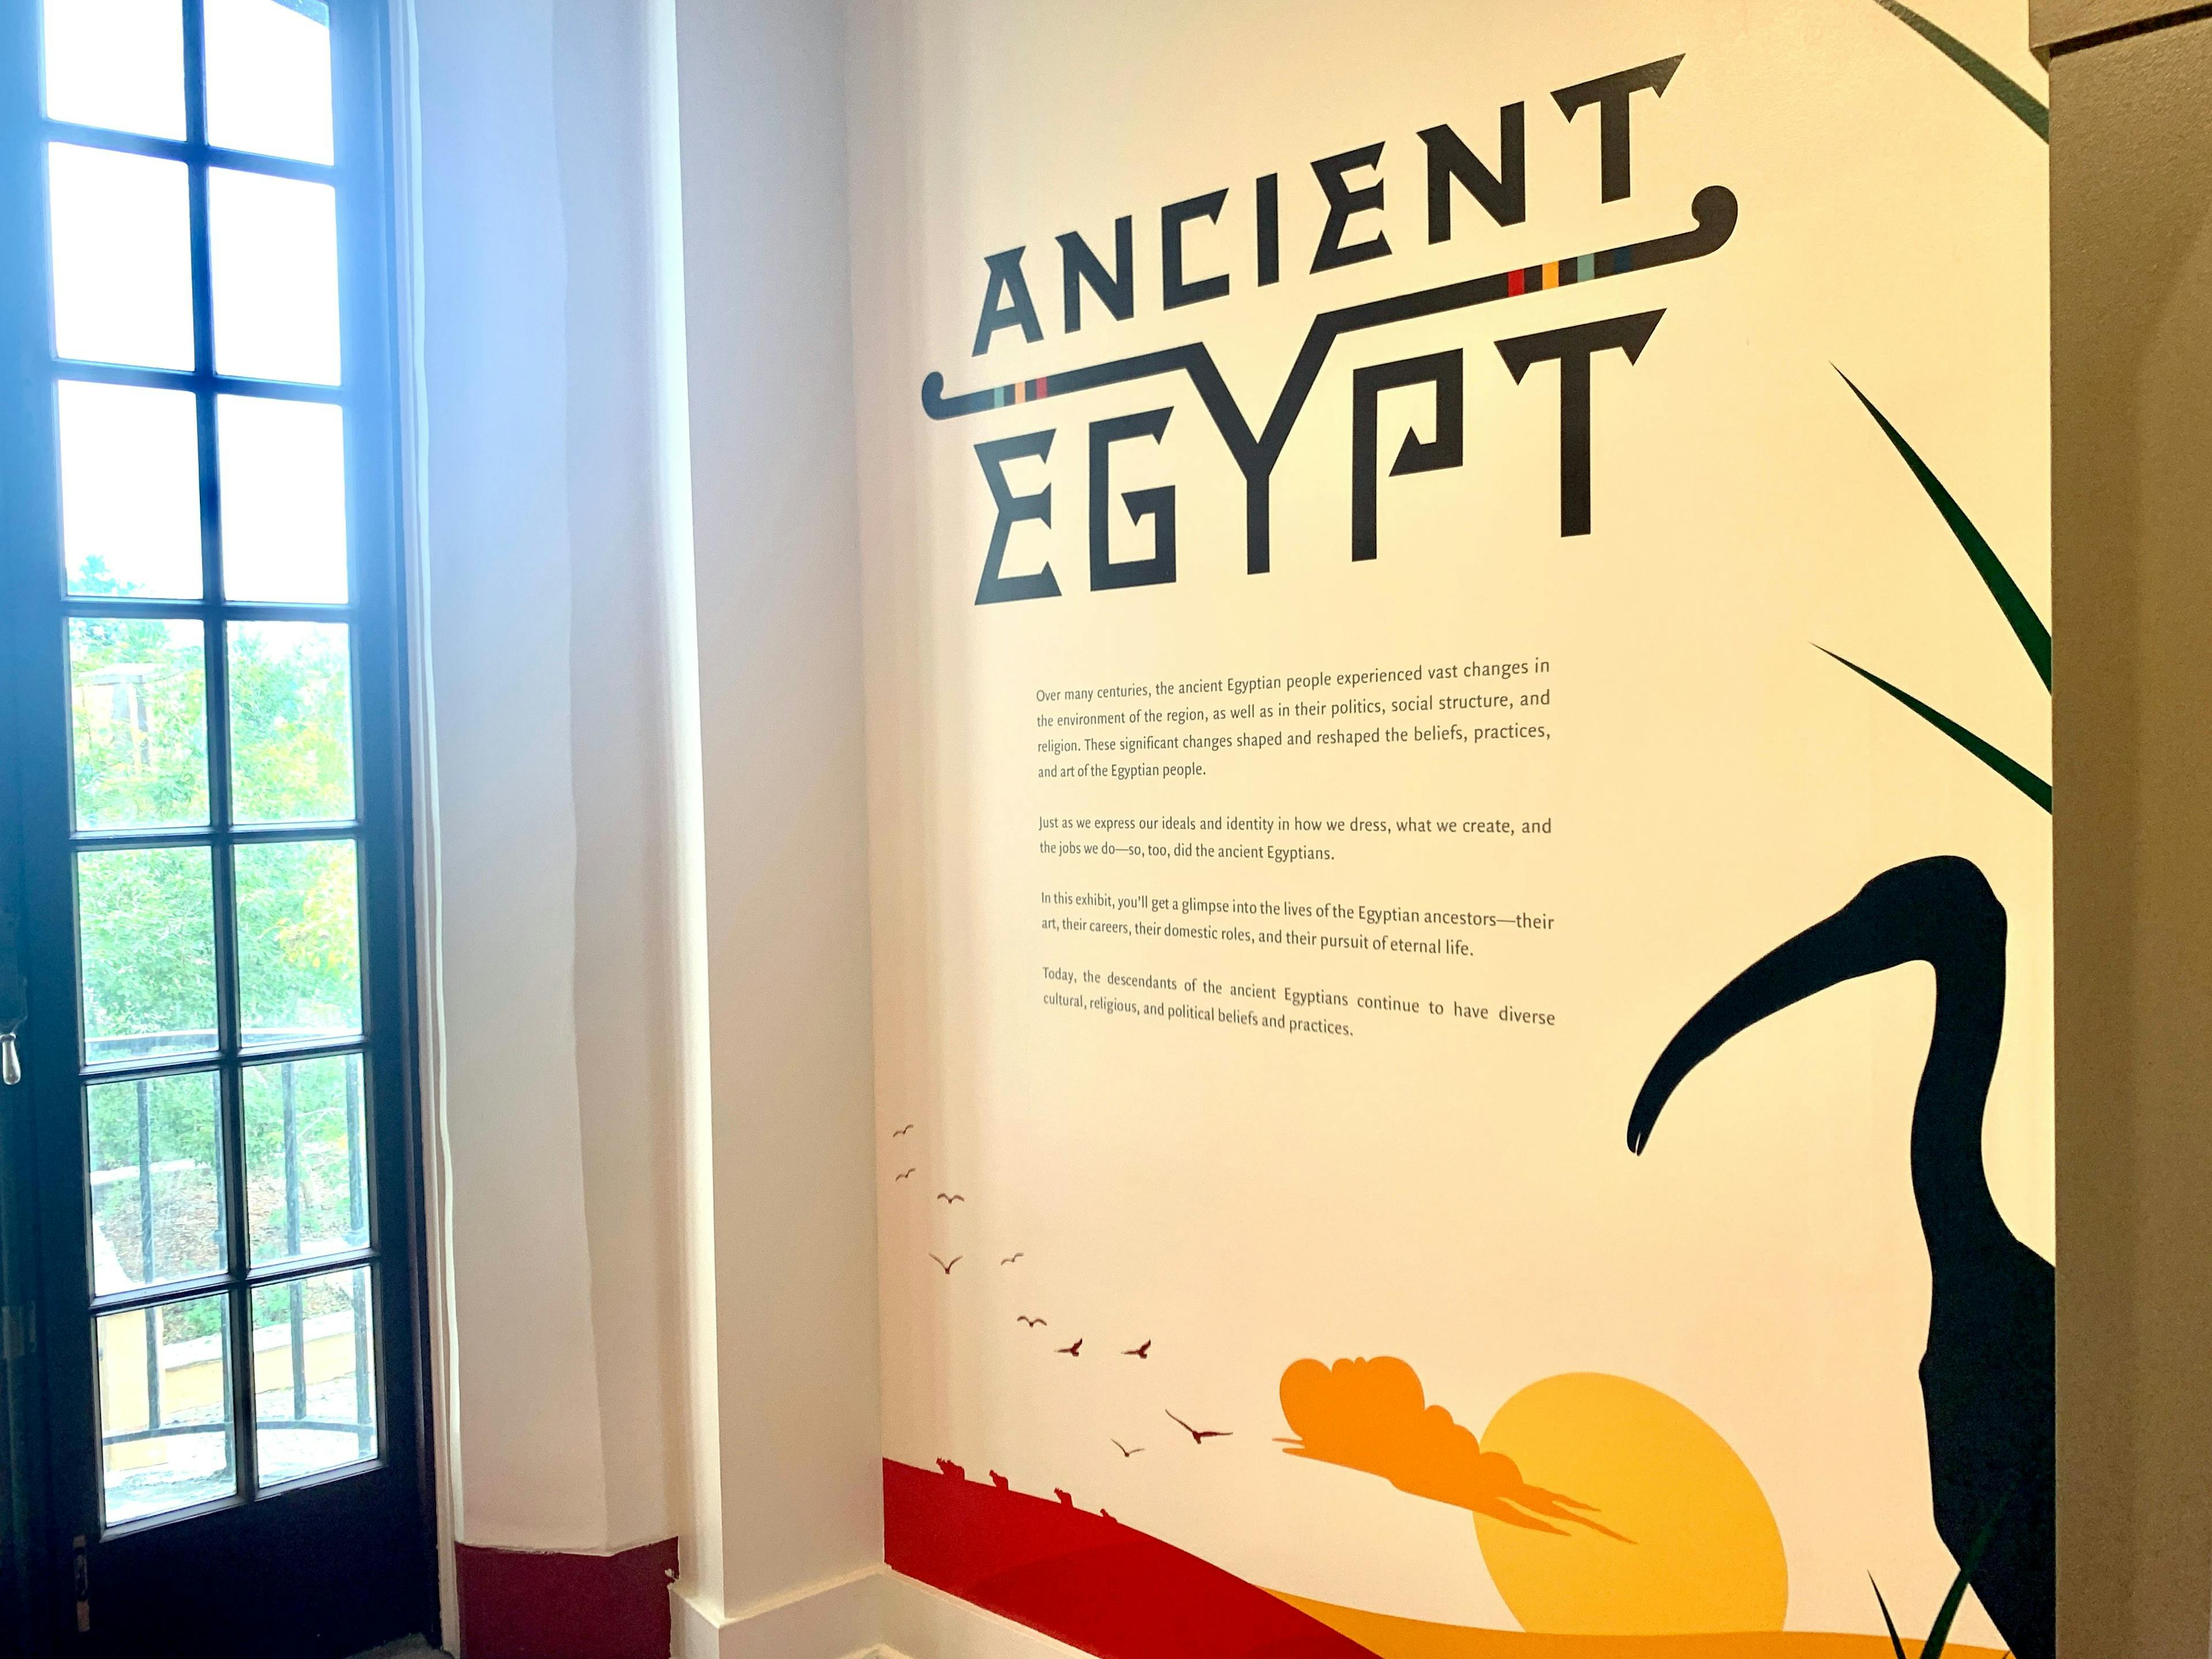 Entrance to the Ancient Egypt Exhibit